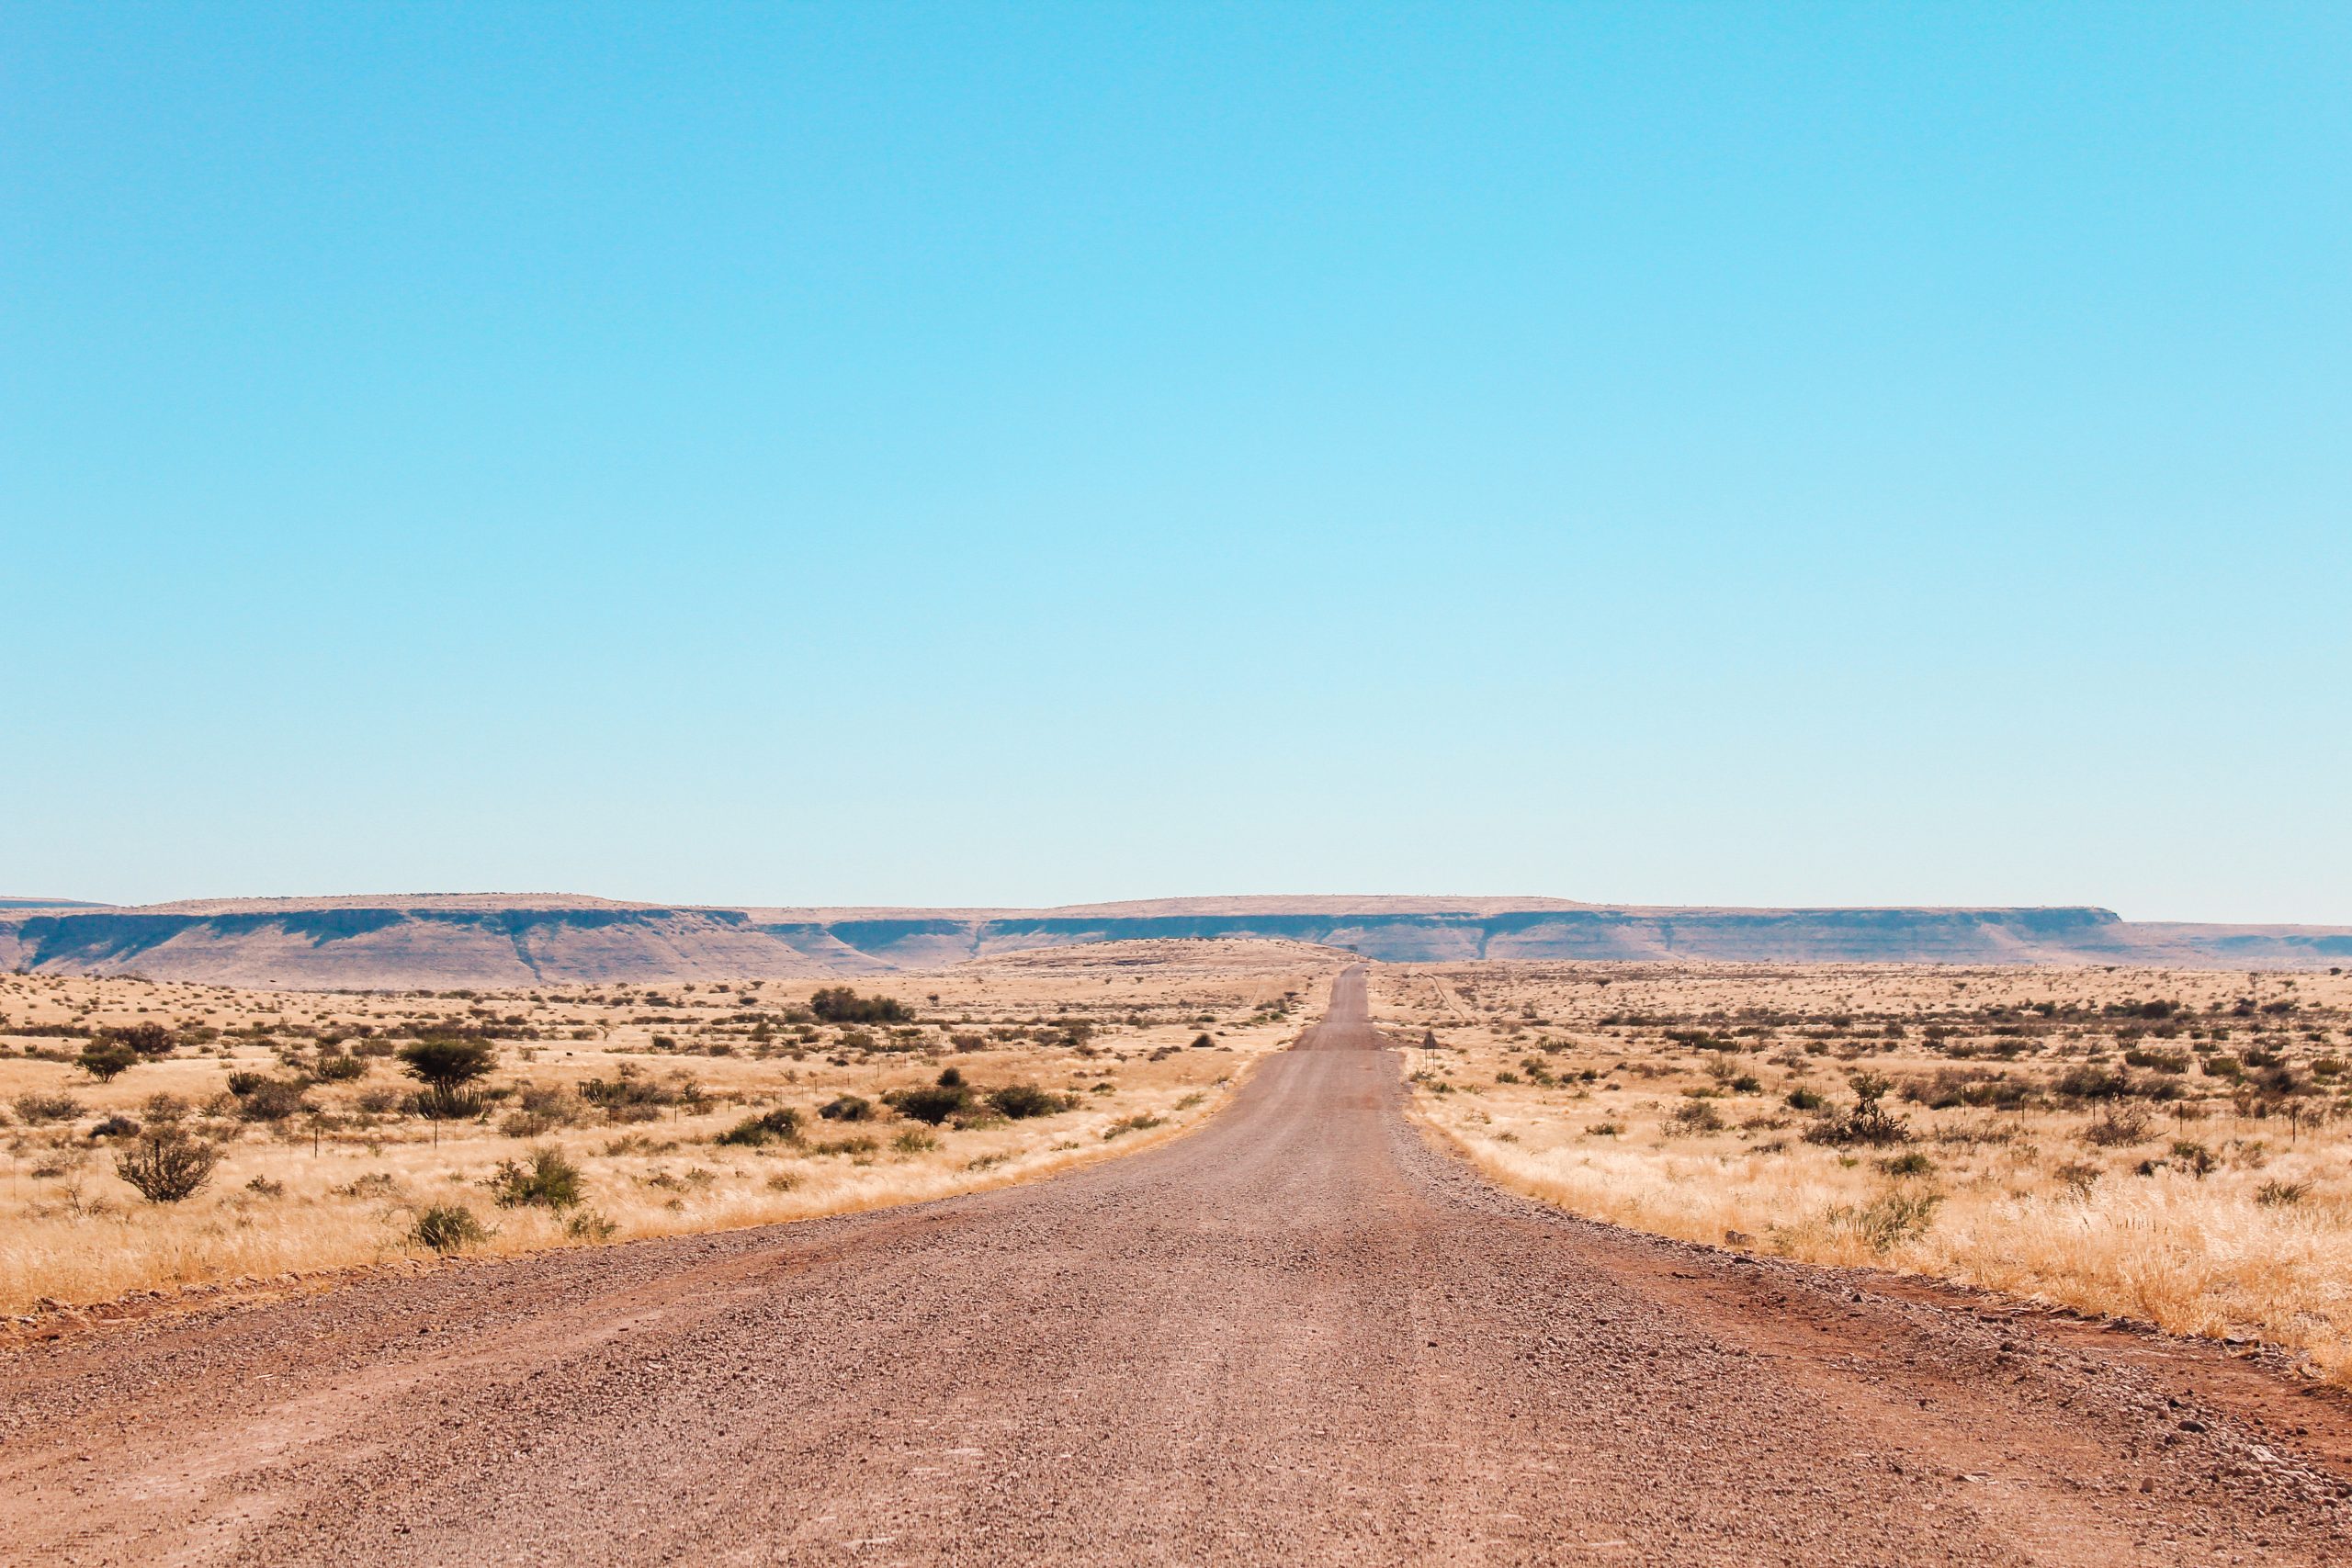 A gravel road in Namibia